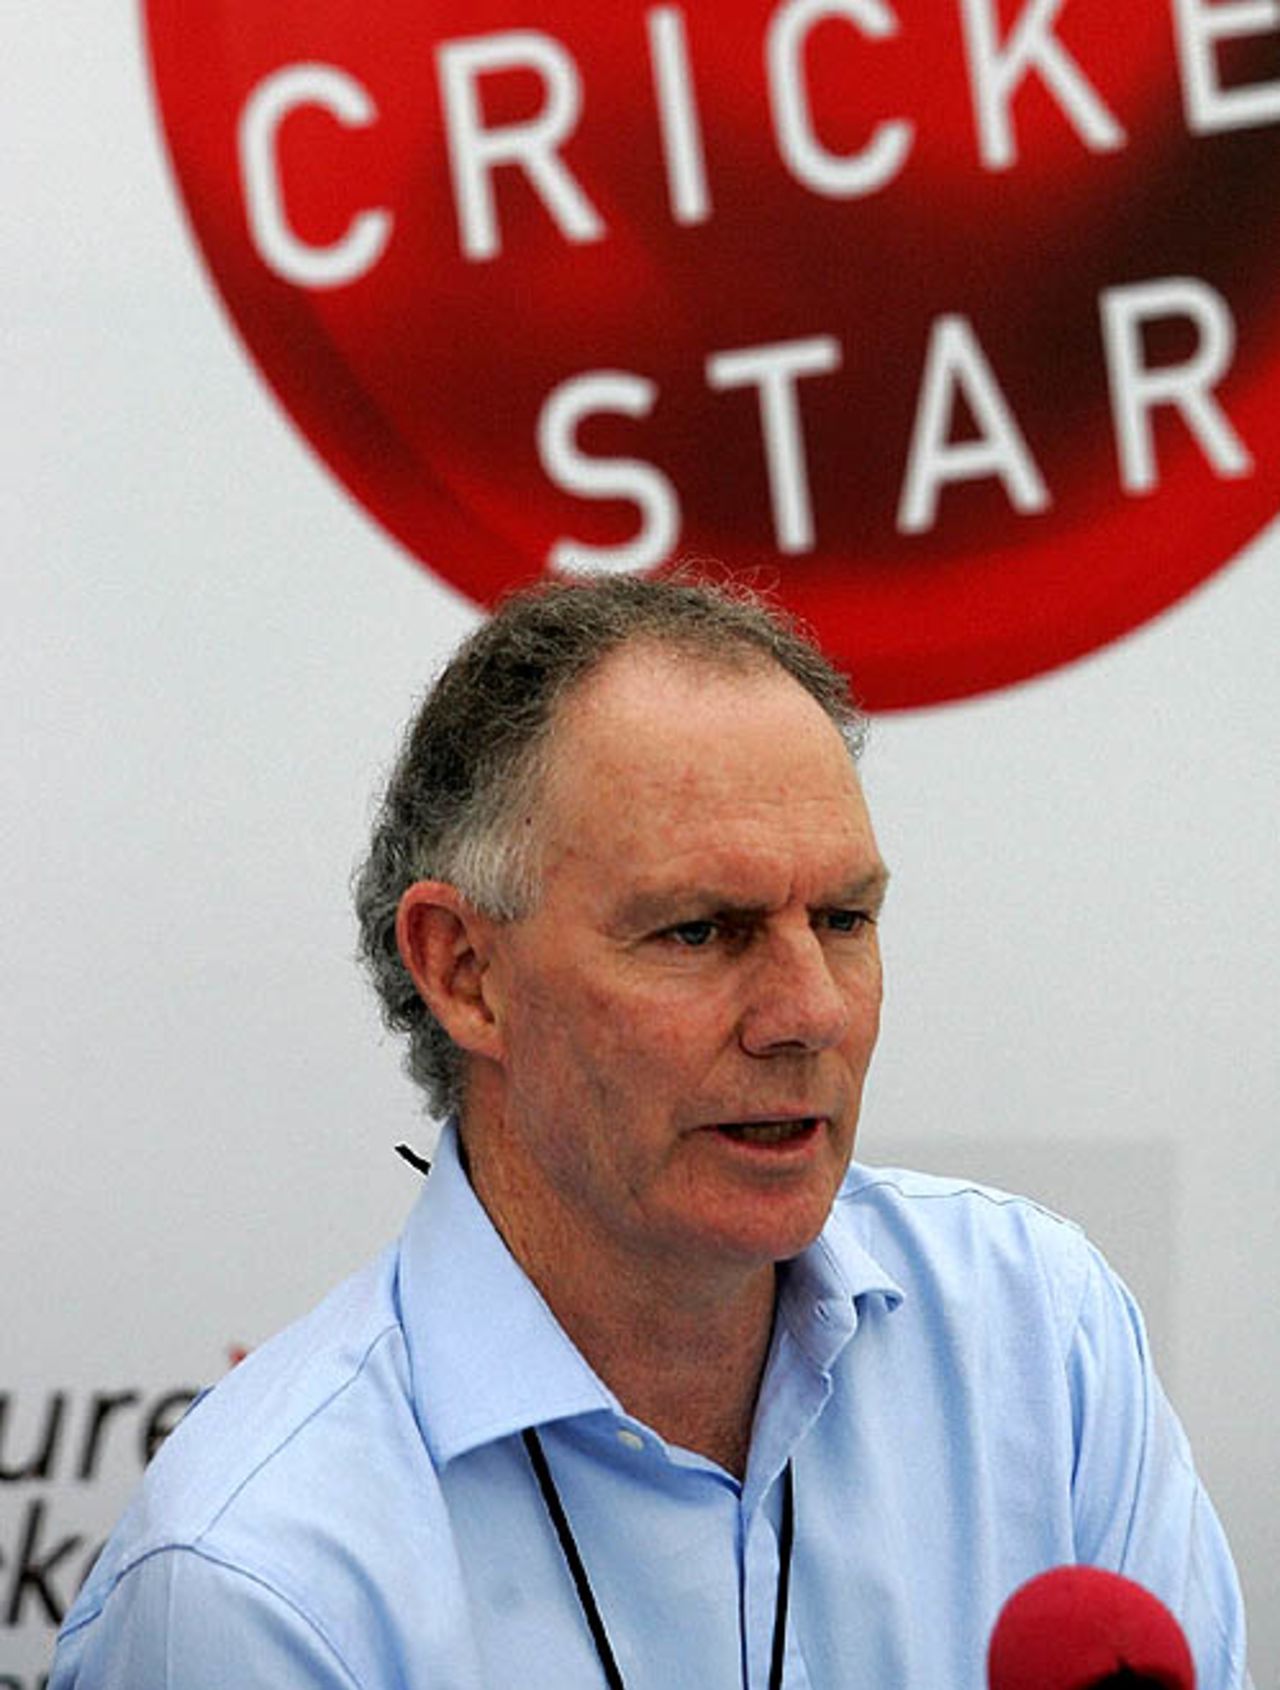 Greg Chappell addresses a press conference in Jaipur, November 17, 2007